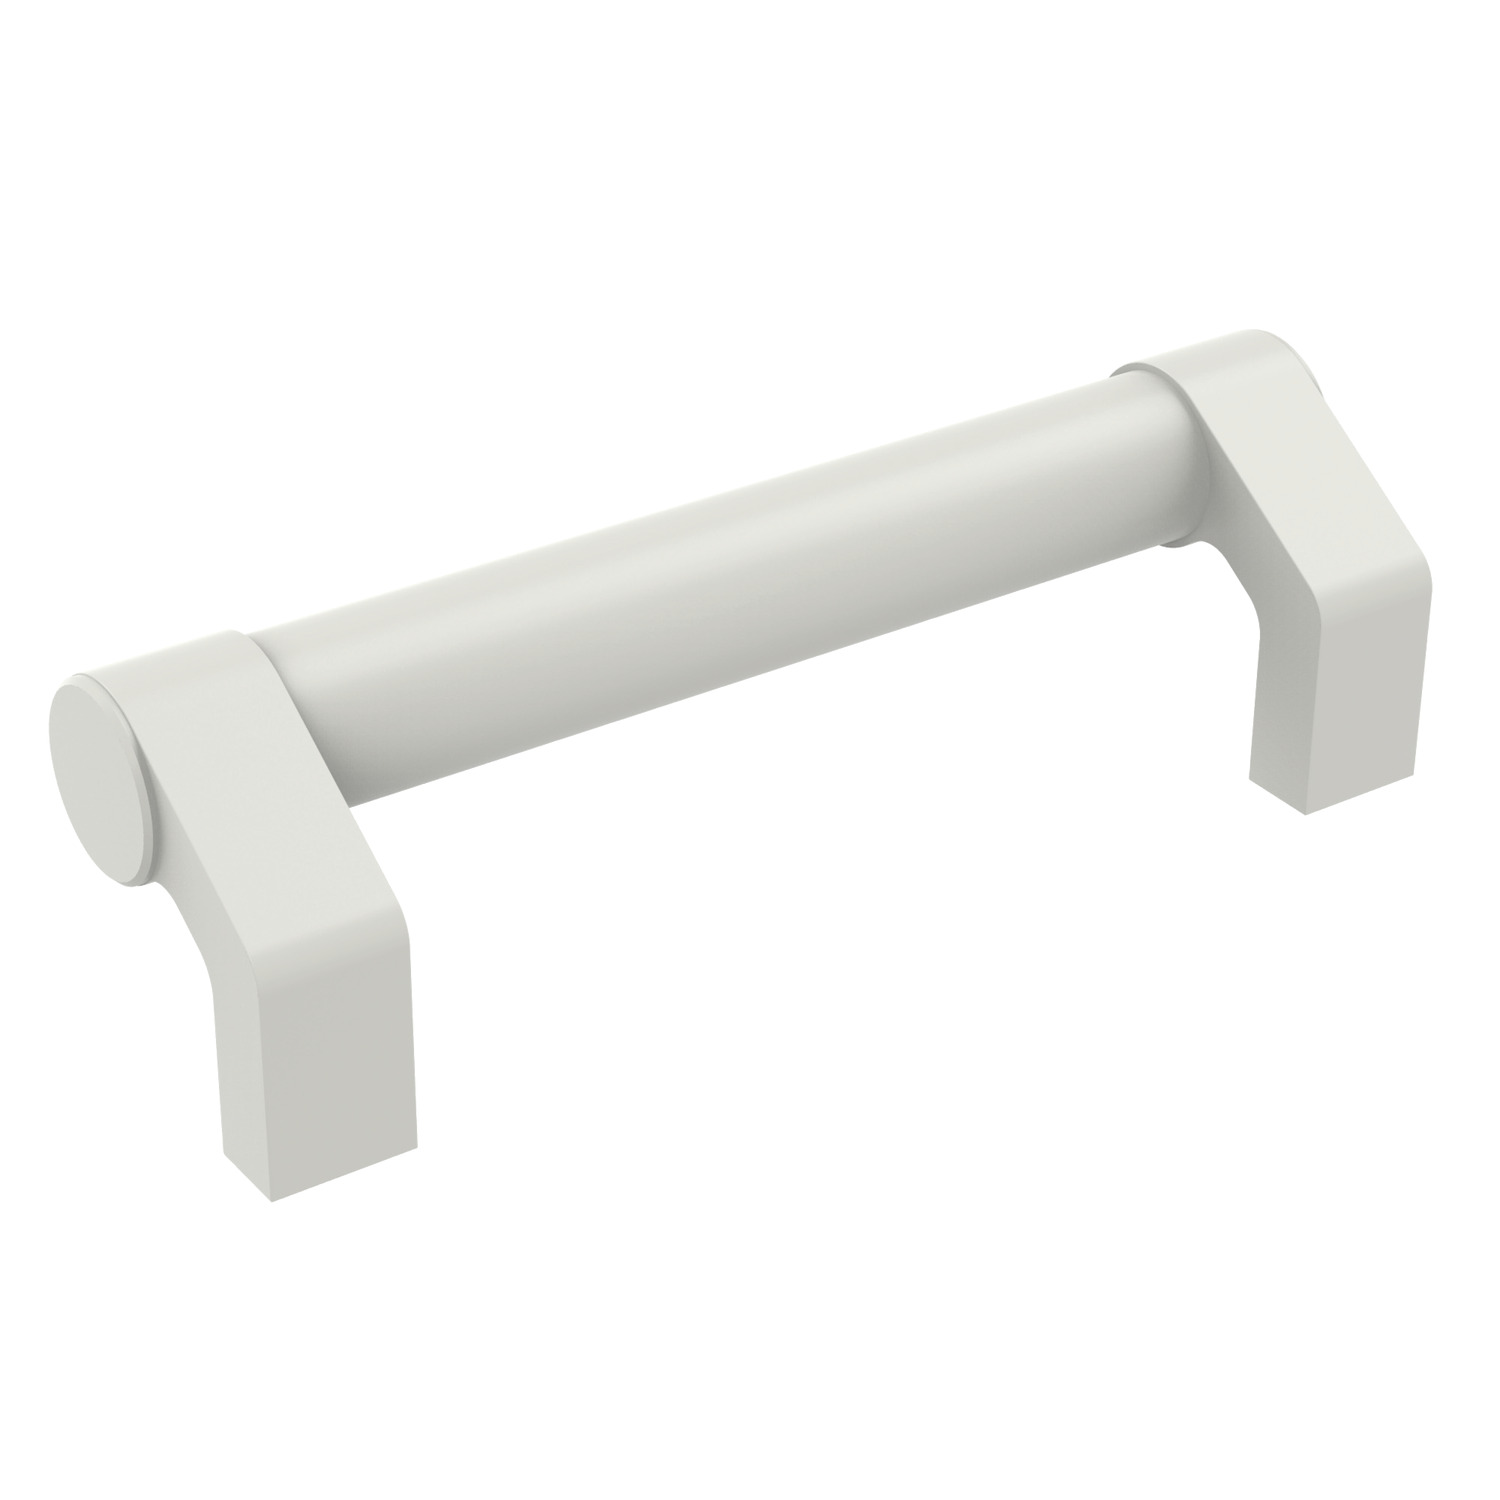 Product 79920, Pull Handles offset tube, Clean line / 